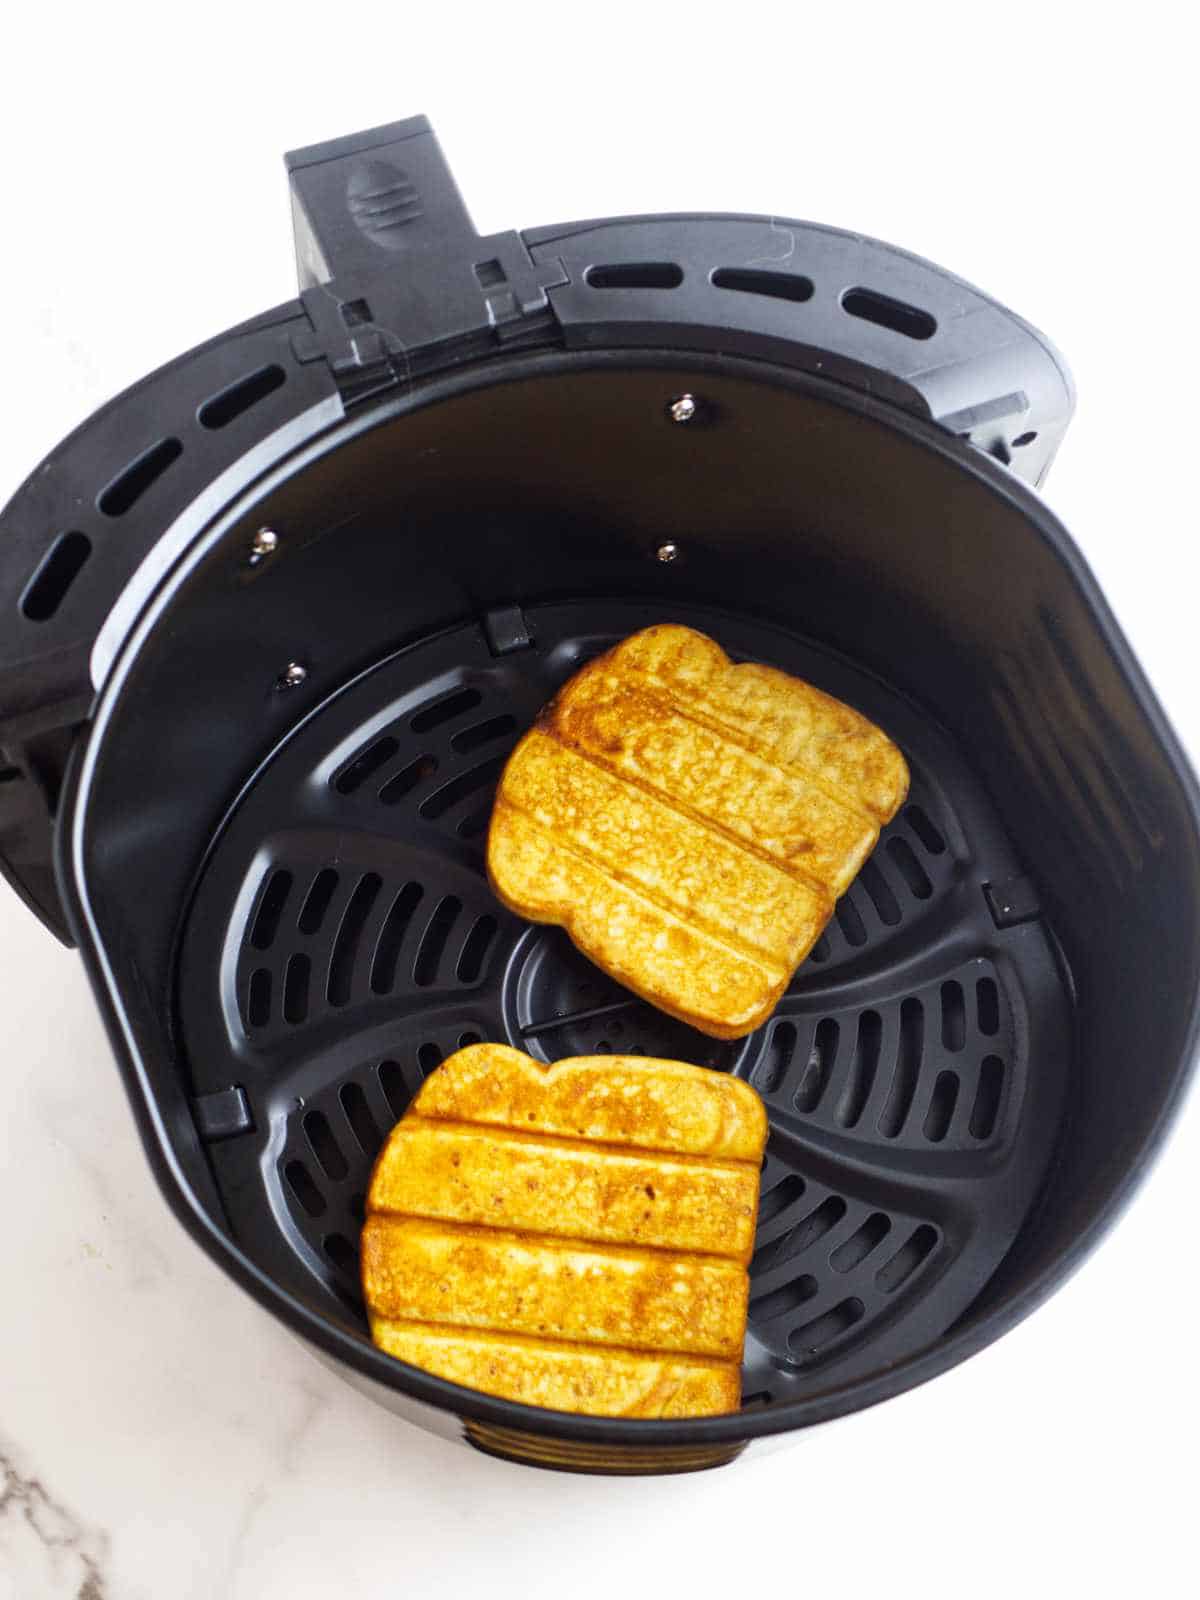 cooked Eggo slices in an air fryer.